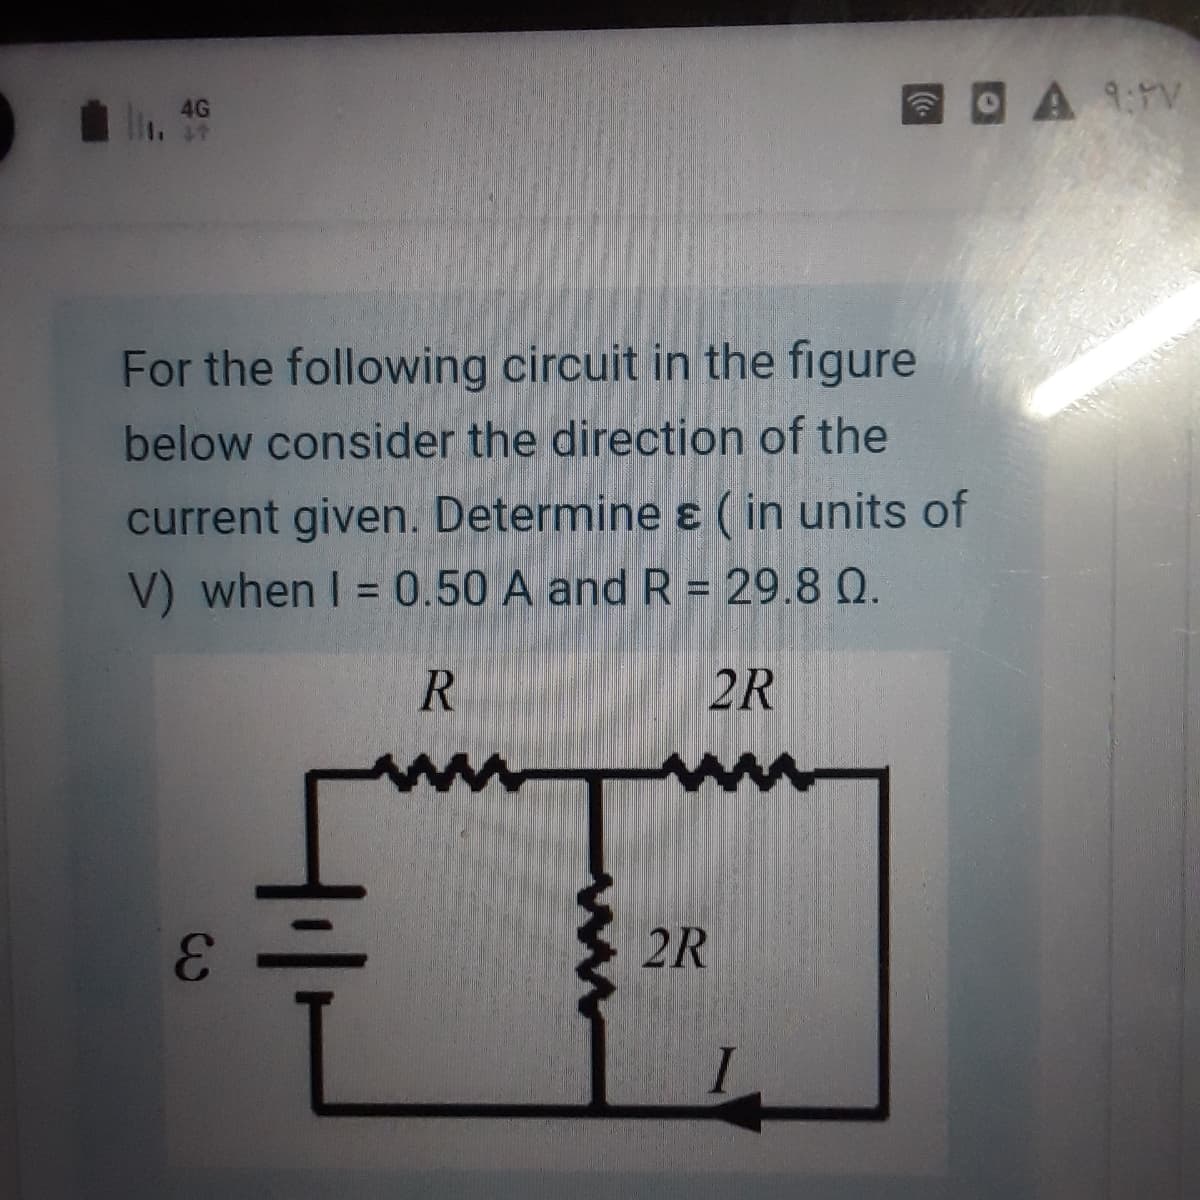 E
OA 9V
4G
For the following circuit in the figure
below consider the direction of the
current given. Determine ɛ ( in units of
V) when I = 0.50 A and R = 29.8 Q.
%3D
R
2R
2R
